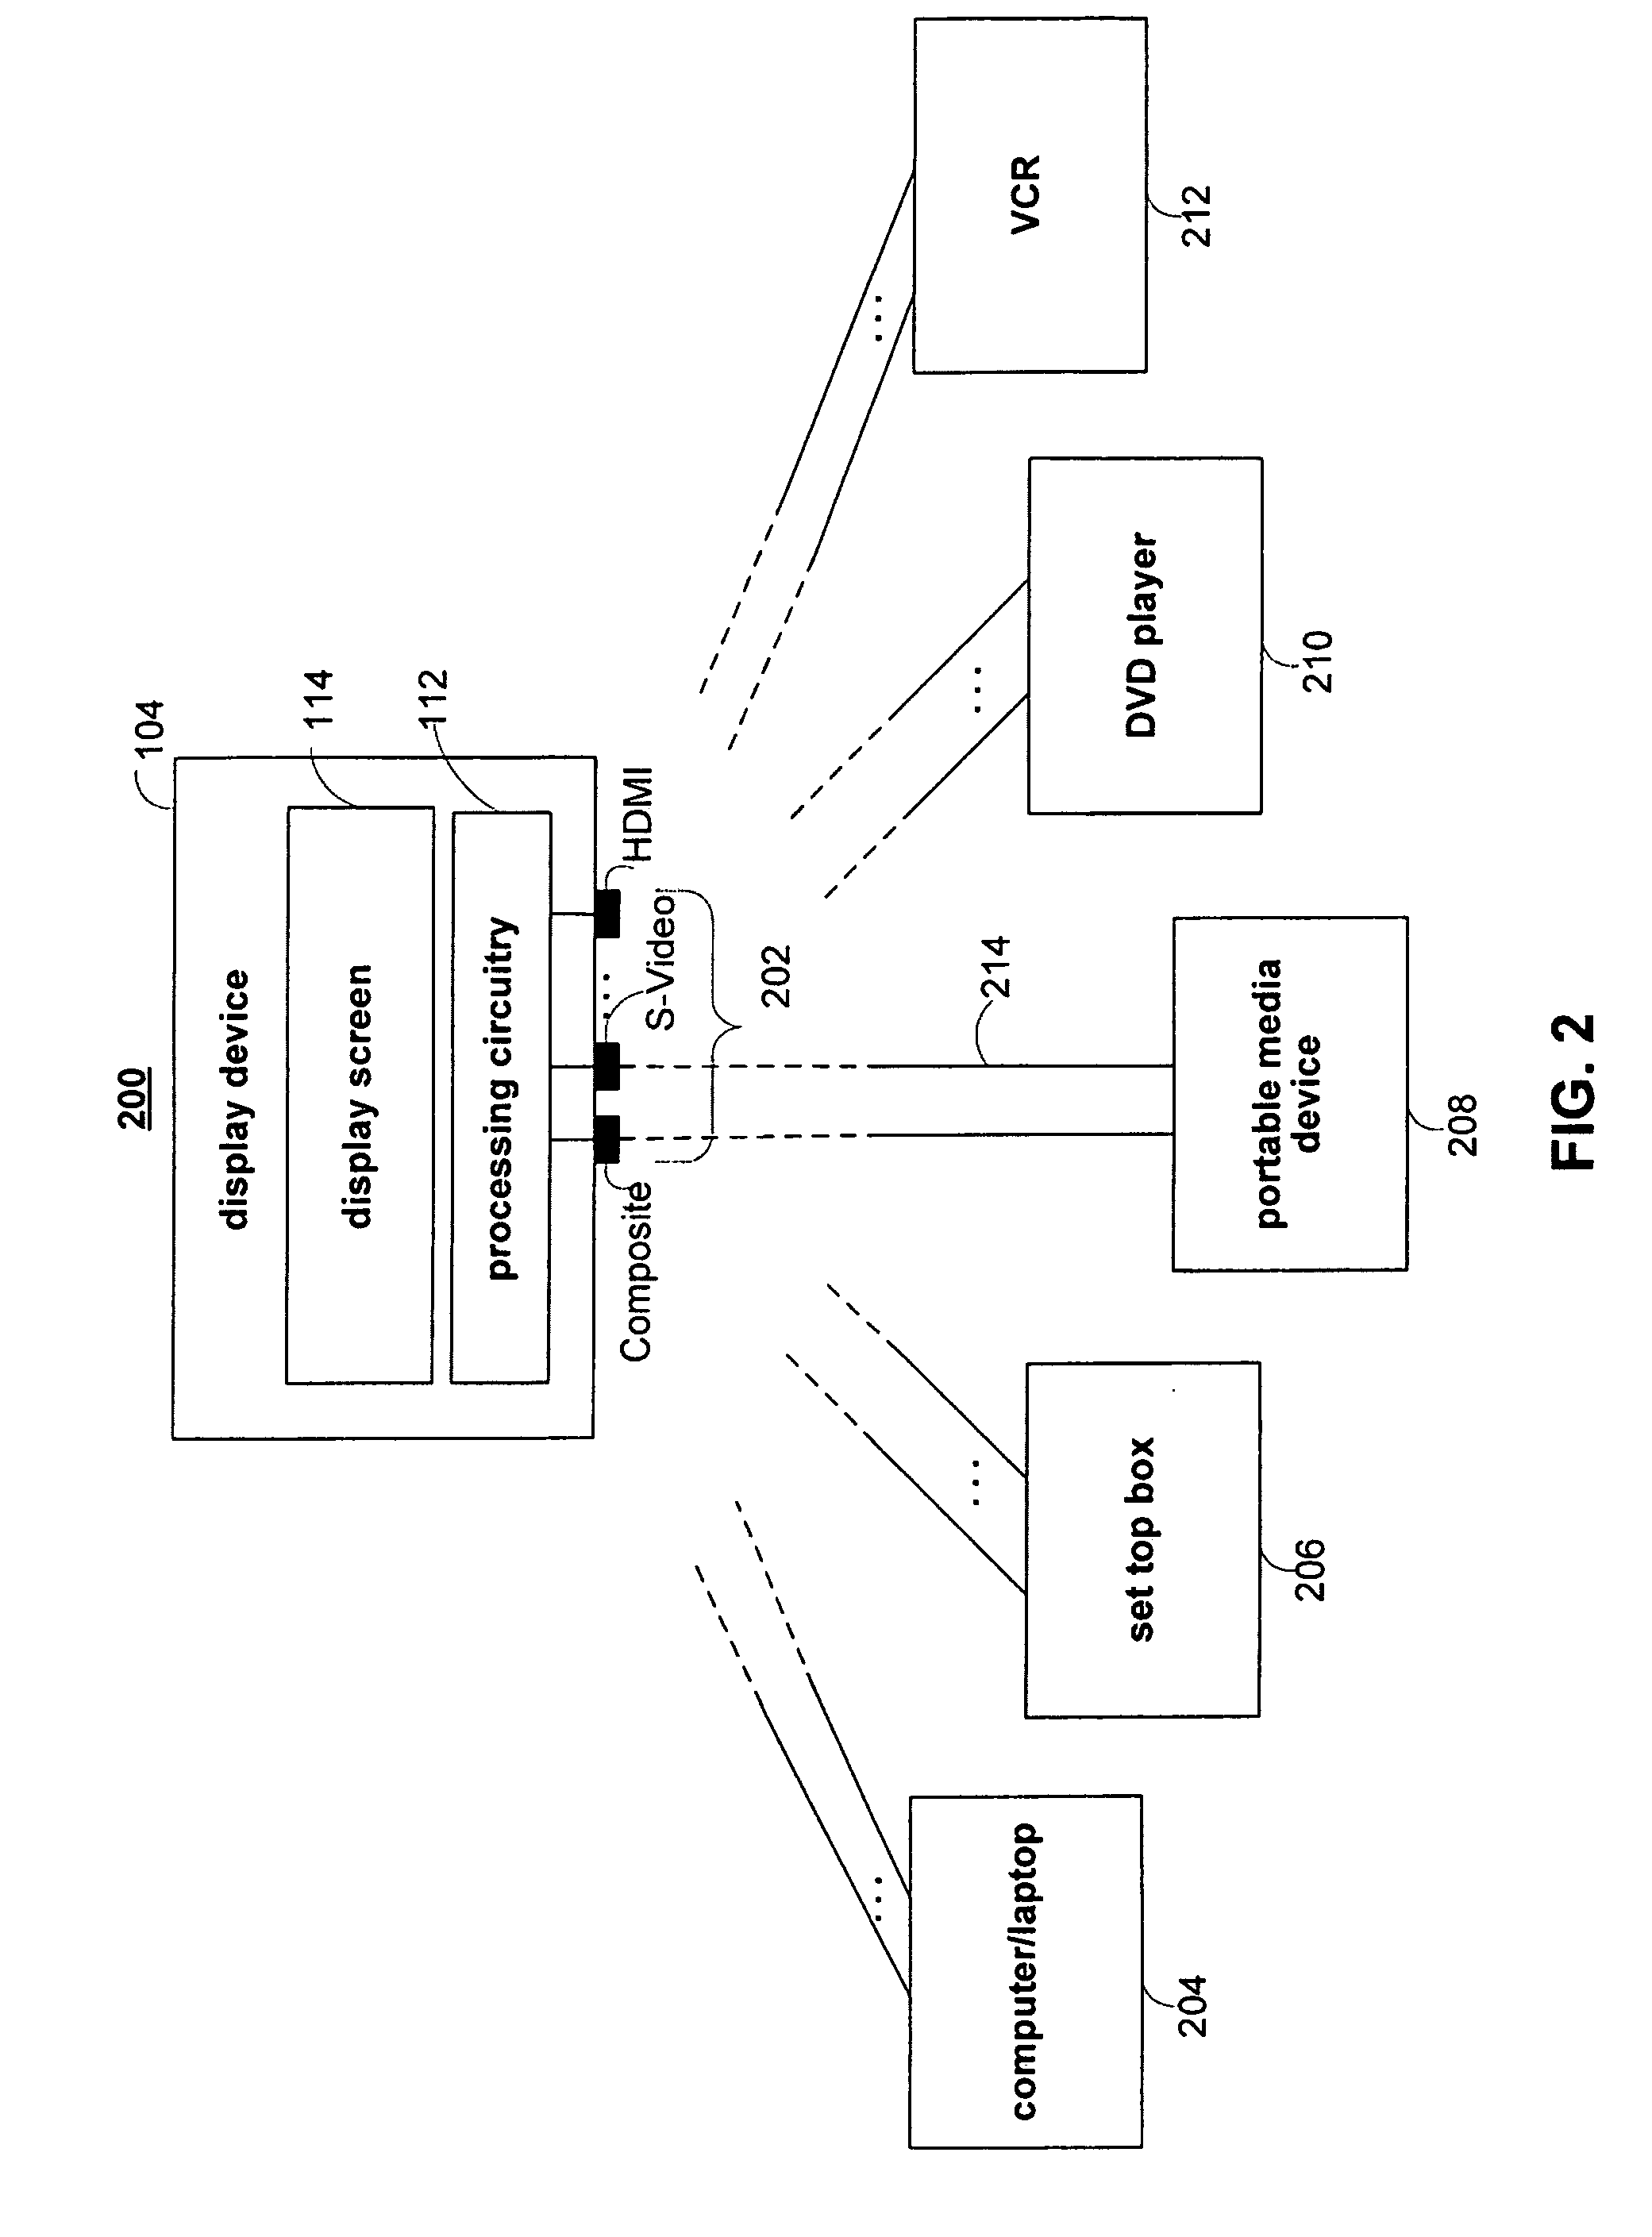 Methods and systems for improving low resolution and low frame rate video